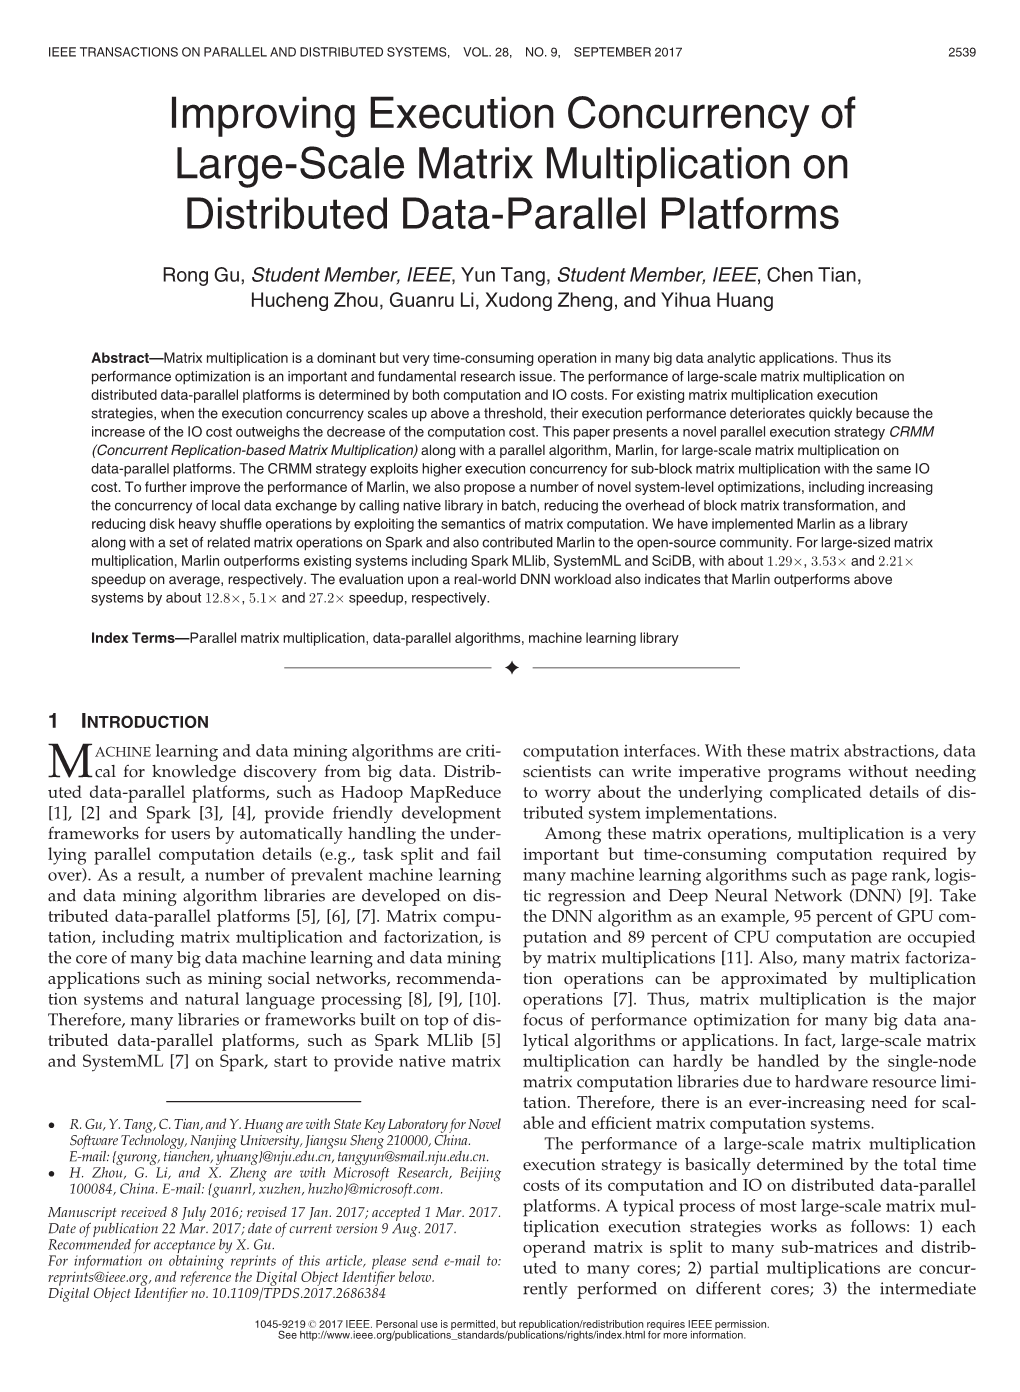 Improving Execution Concurrency of Large-Scale Matrix Multiplication on Distributed Data-Parallel Platforms